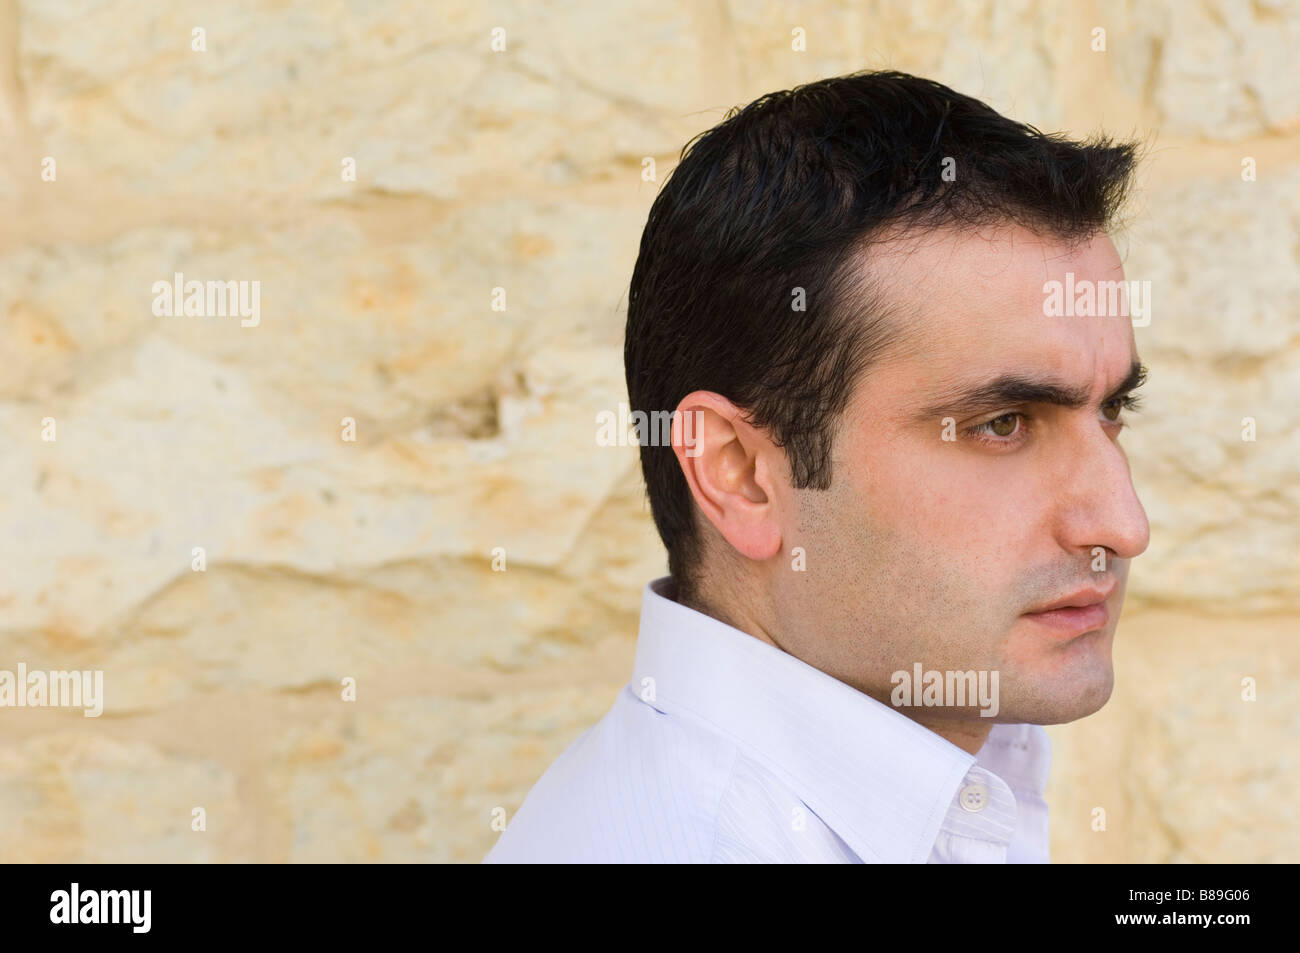 Portrait of a man looking away Stock Photo - Alamy